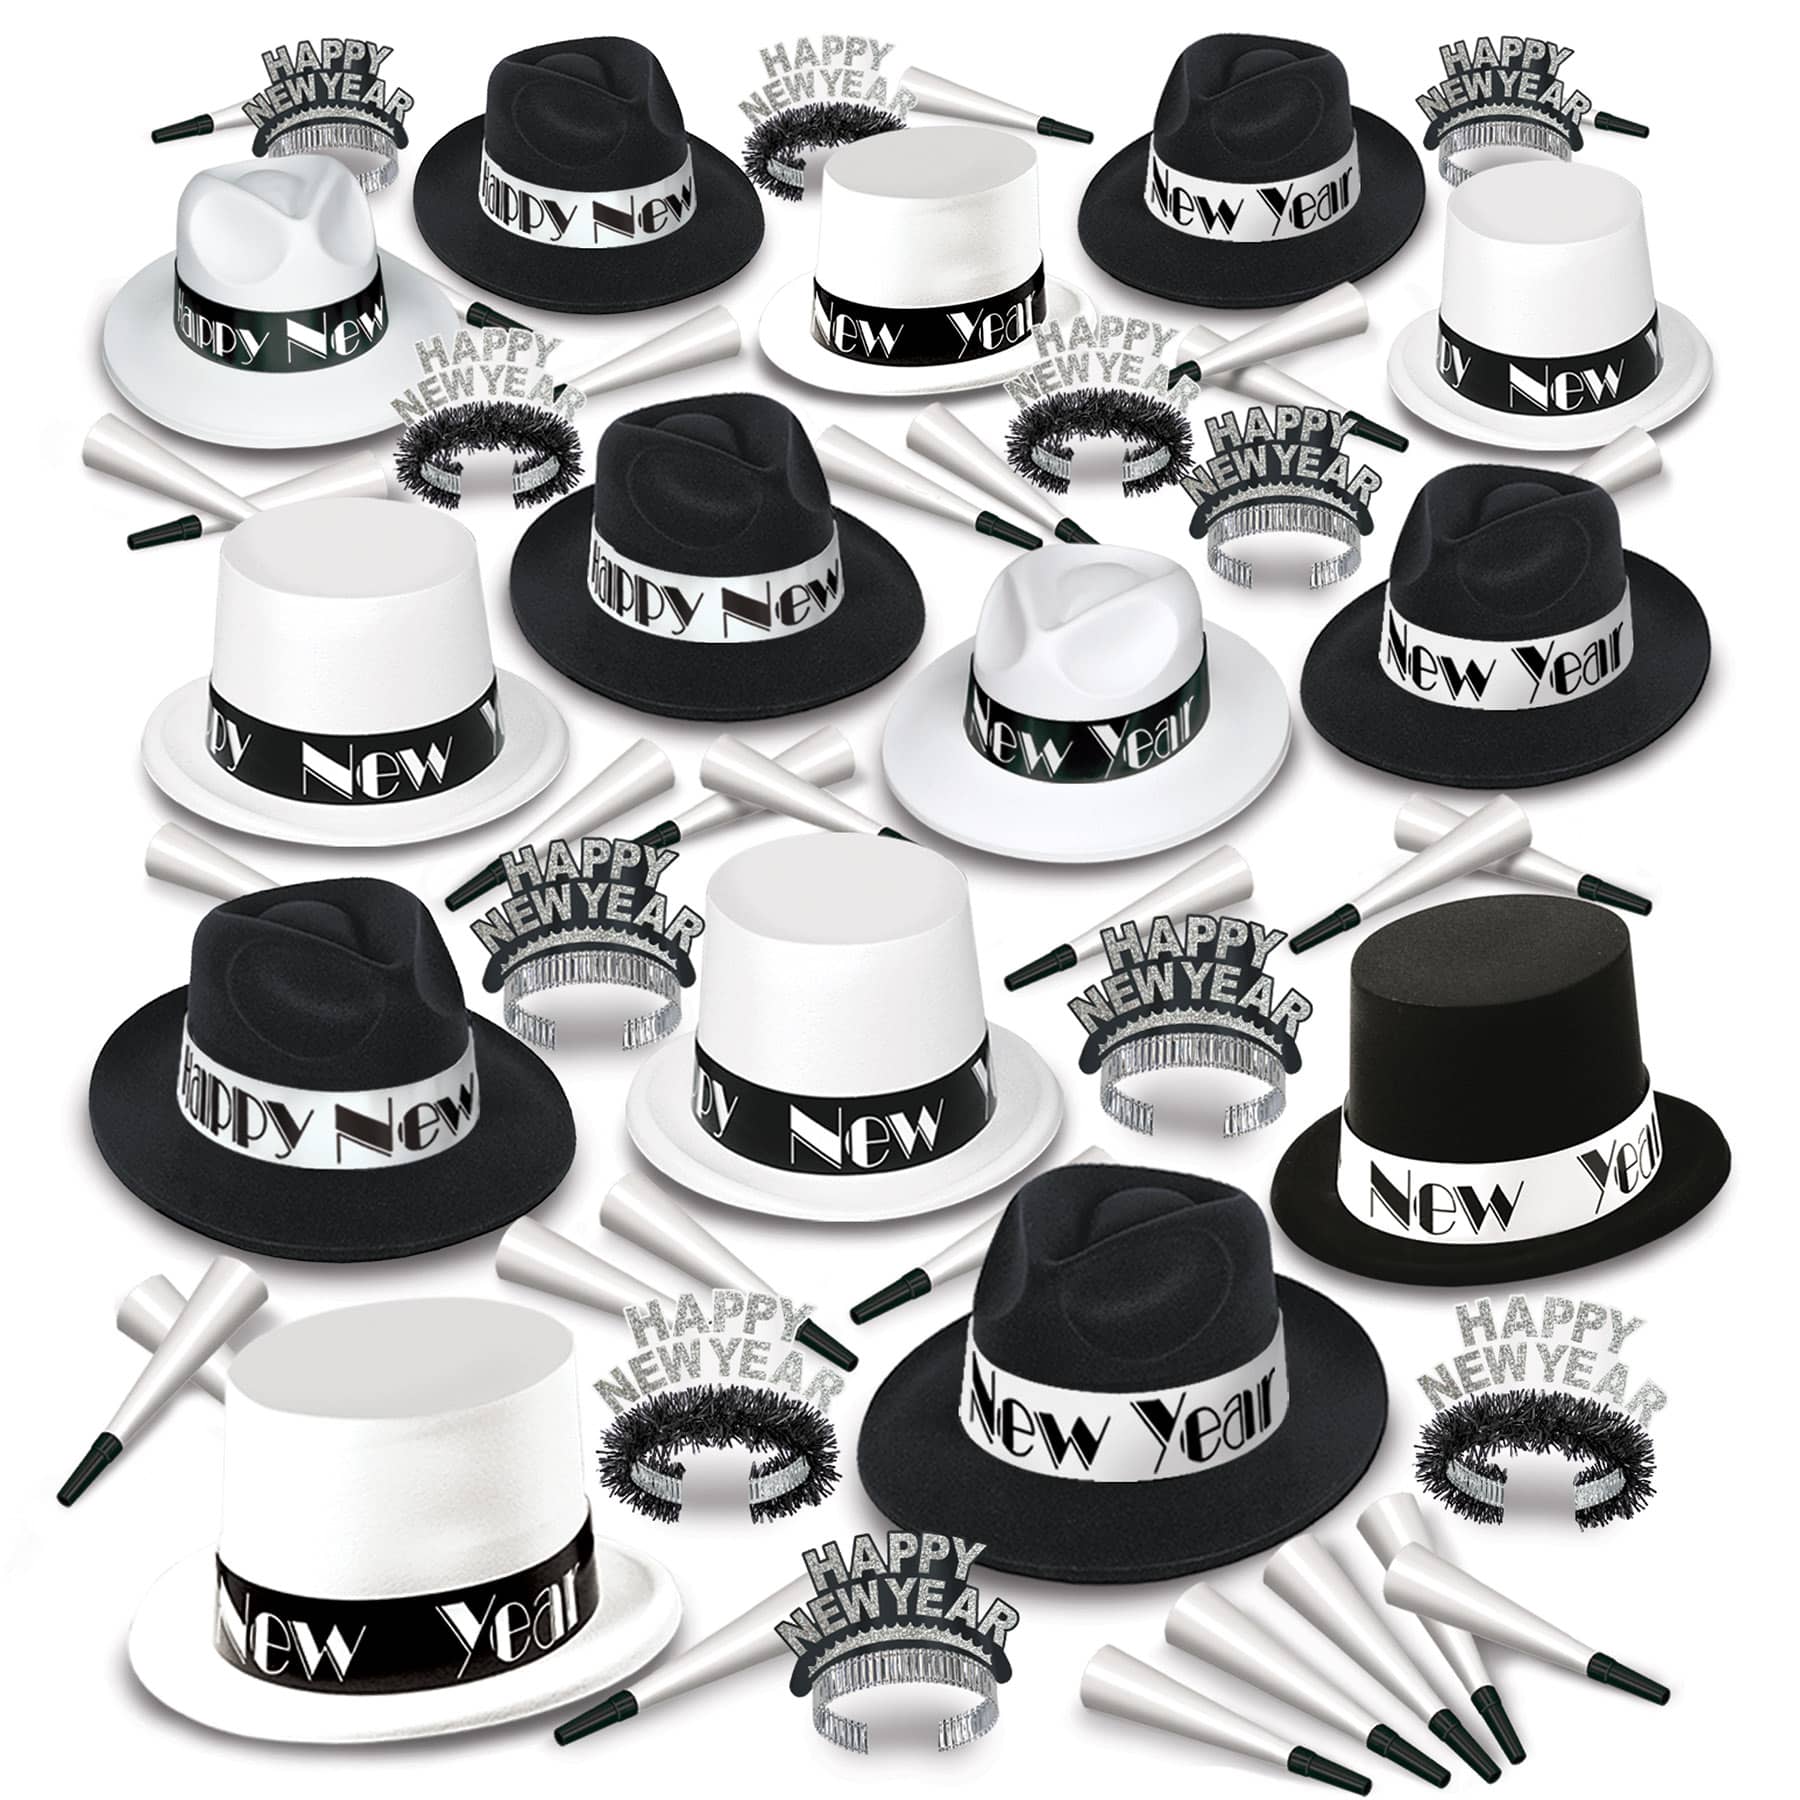 Black and White Top Hats and Fedoras with horns and tiara for a party of 100